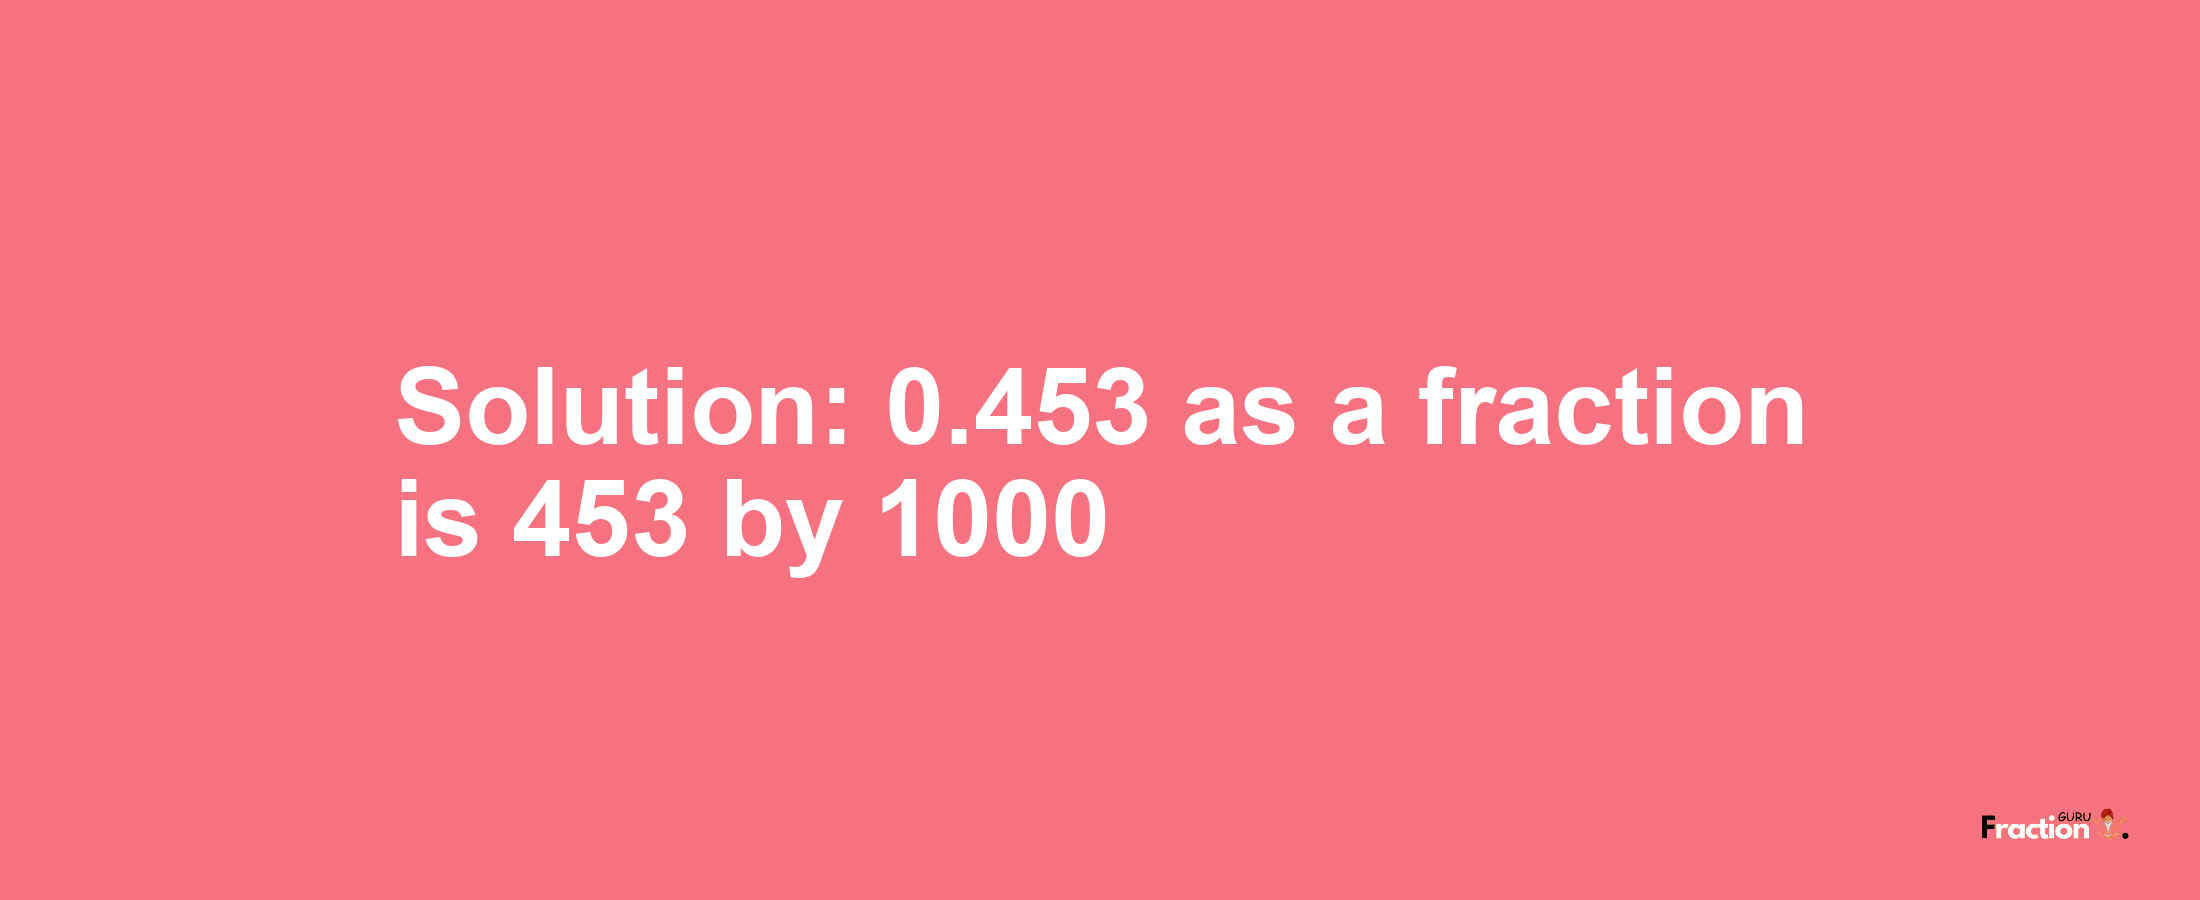 Solution:0.453 as a fraction is 453/1000